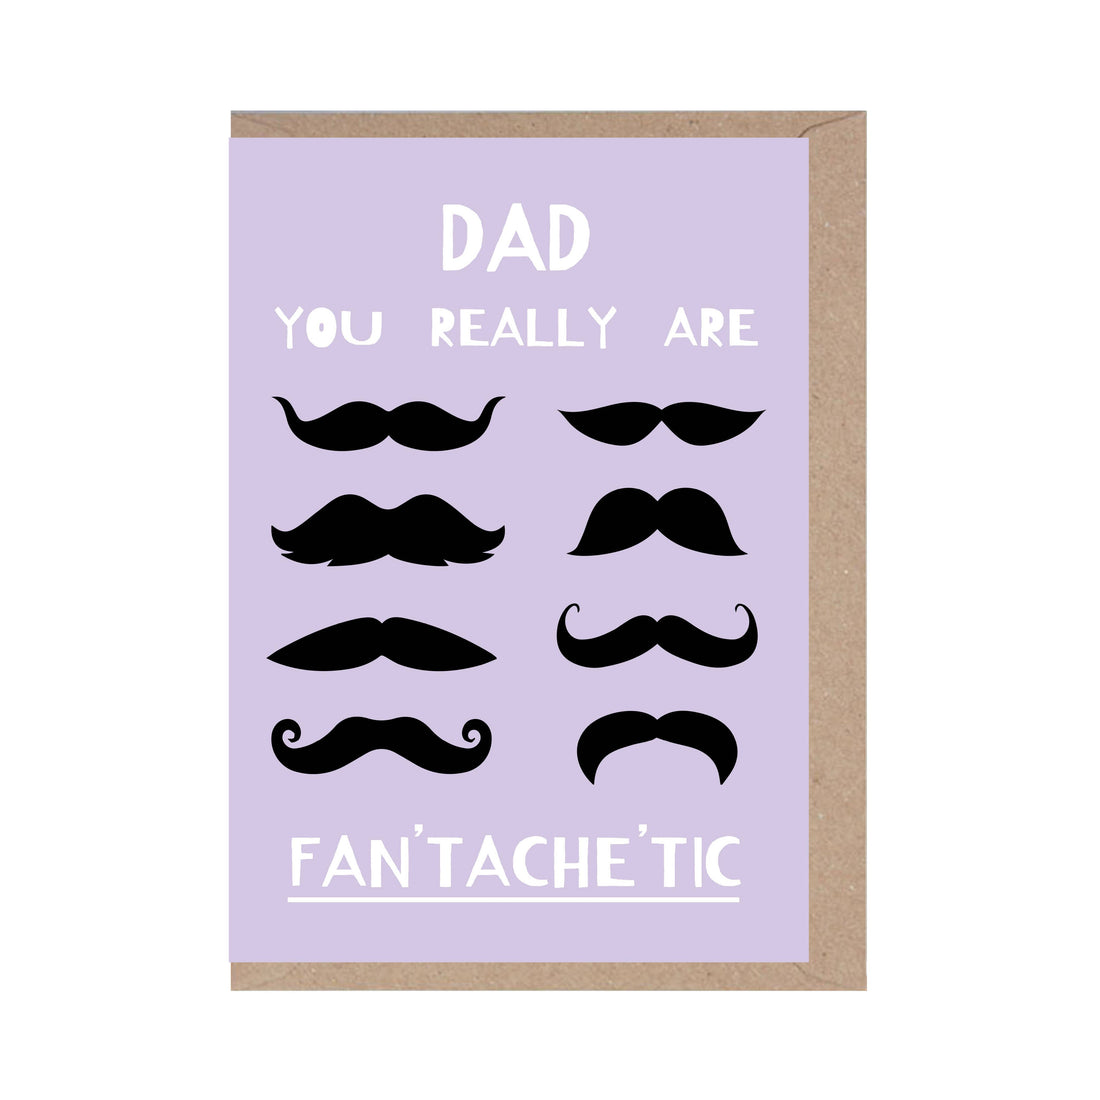 Dad, You Really Are Fan'tache'tic